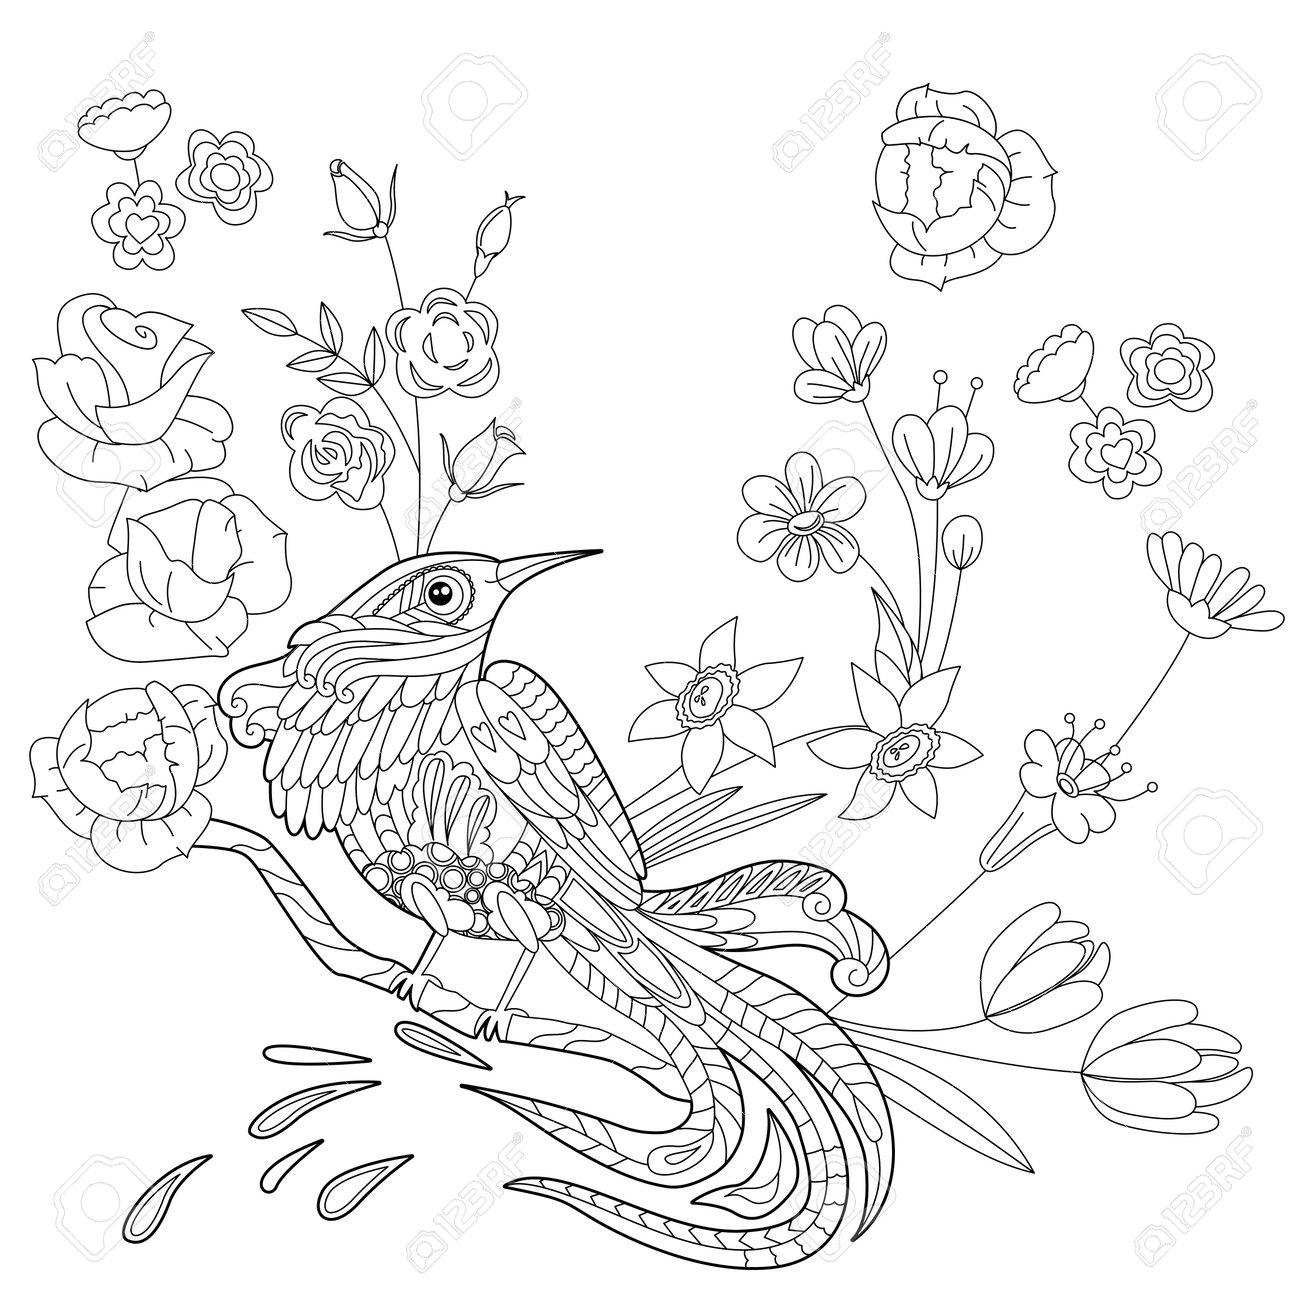 Contour linear illustration for coloring book with paradise bird in flowers tropic bird anti stress picture line art design for adult or kids in zen